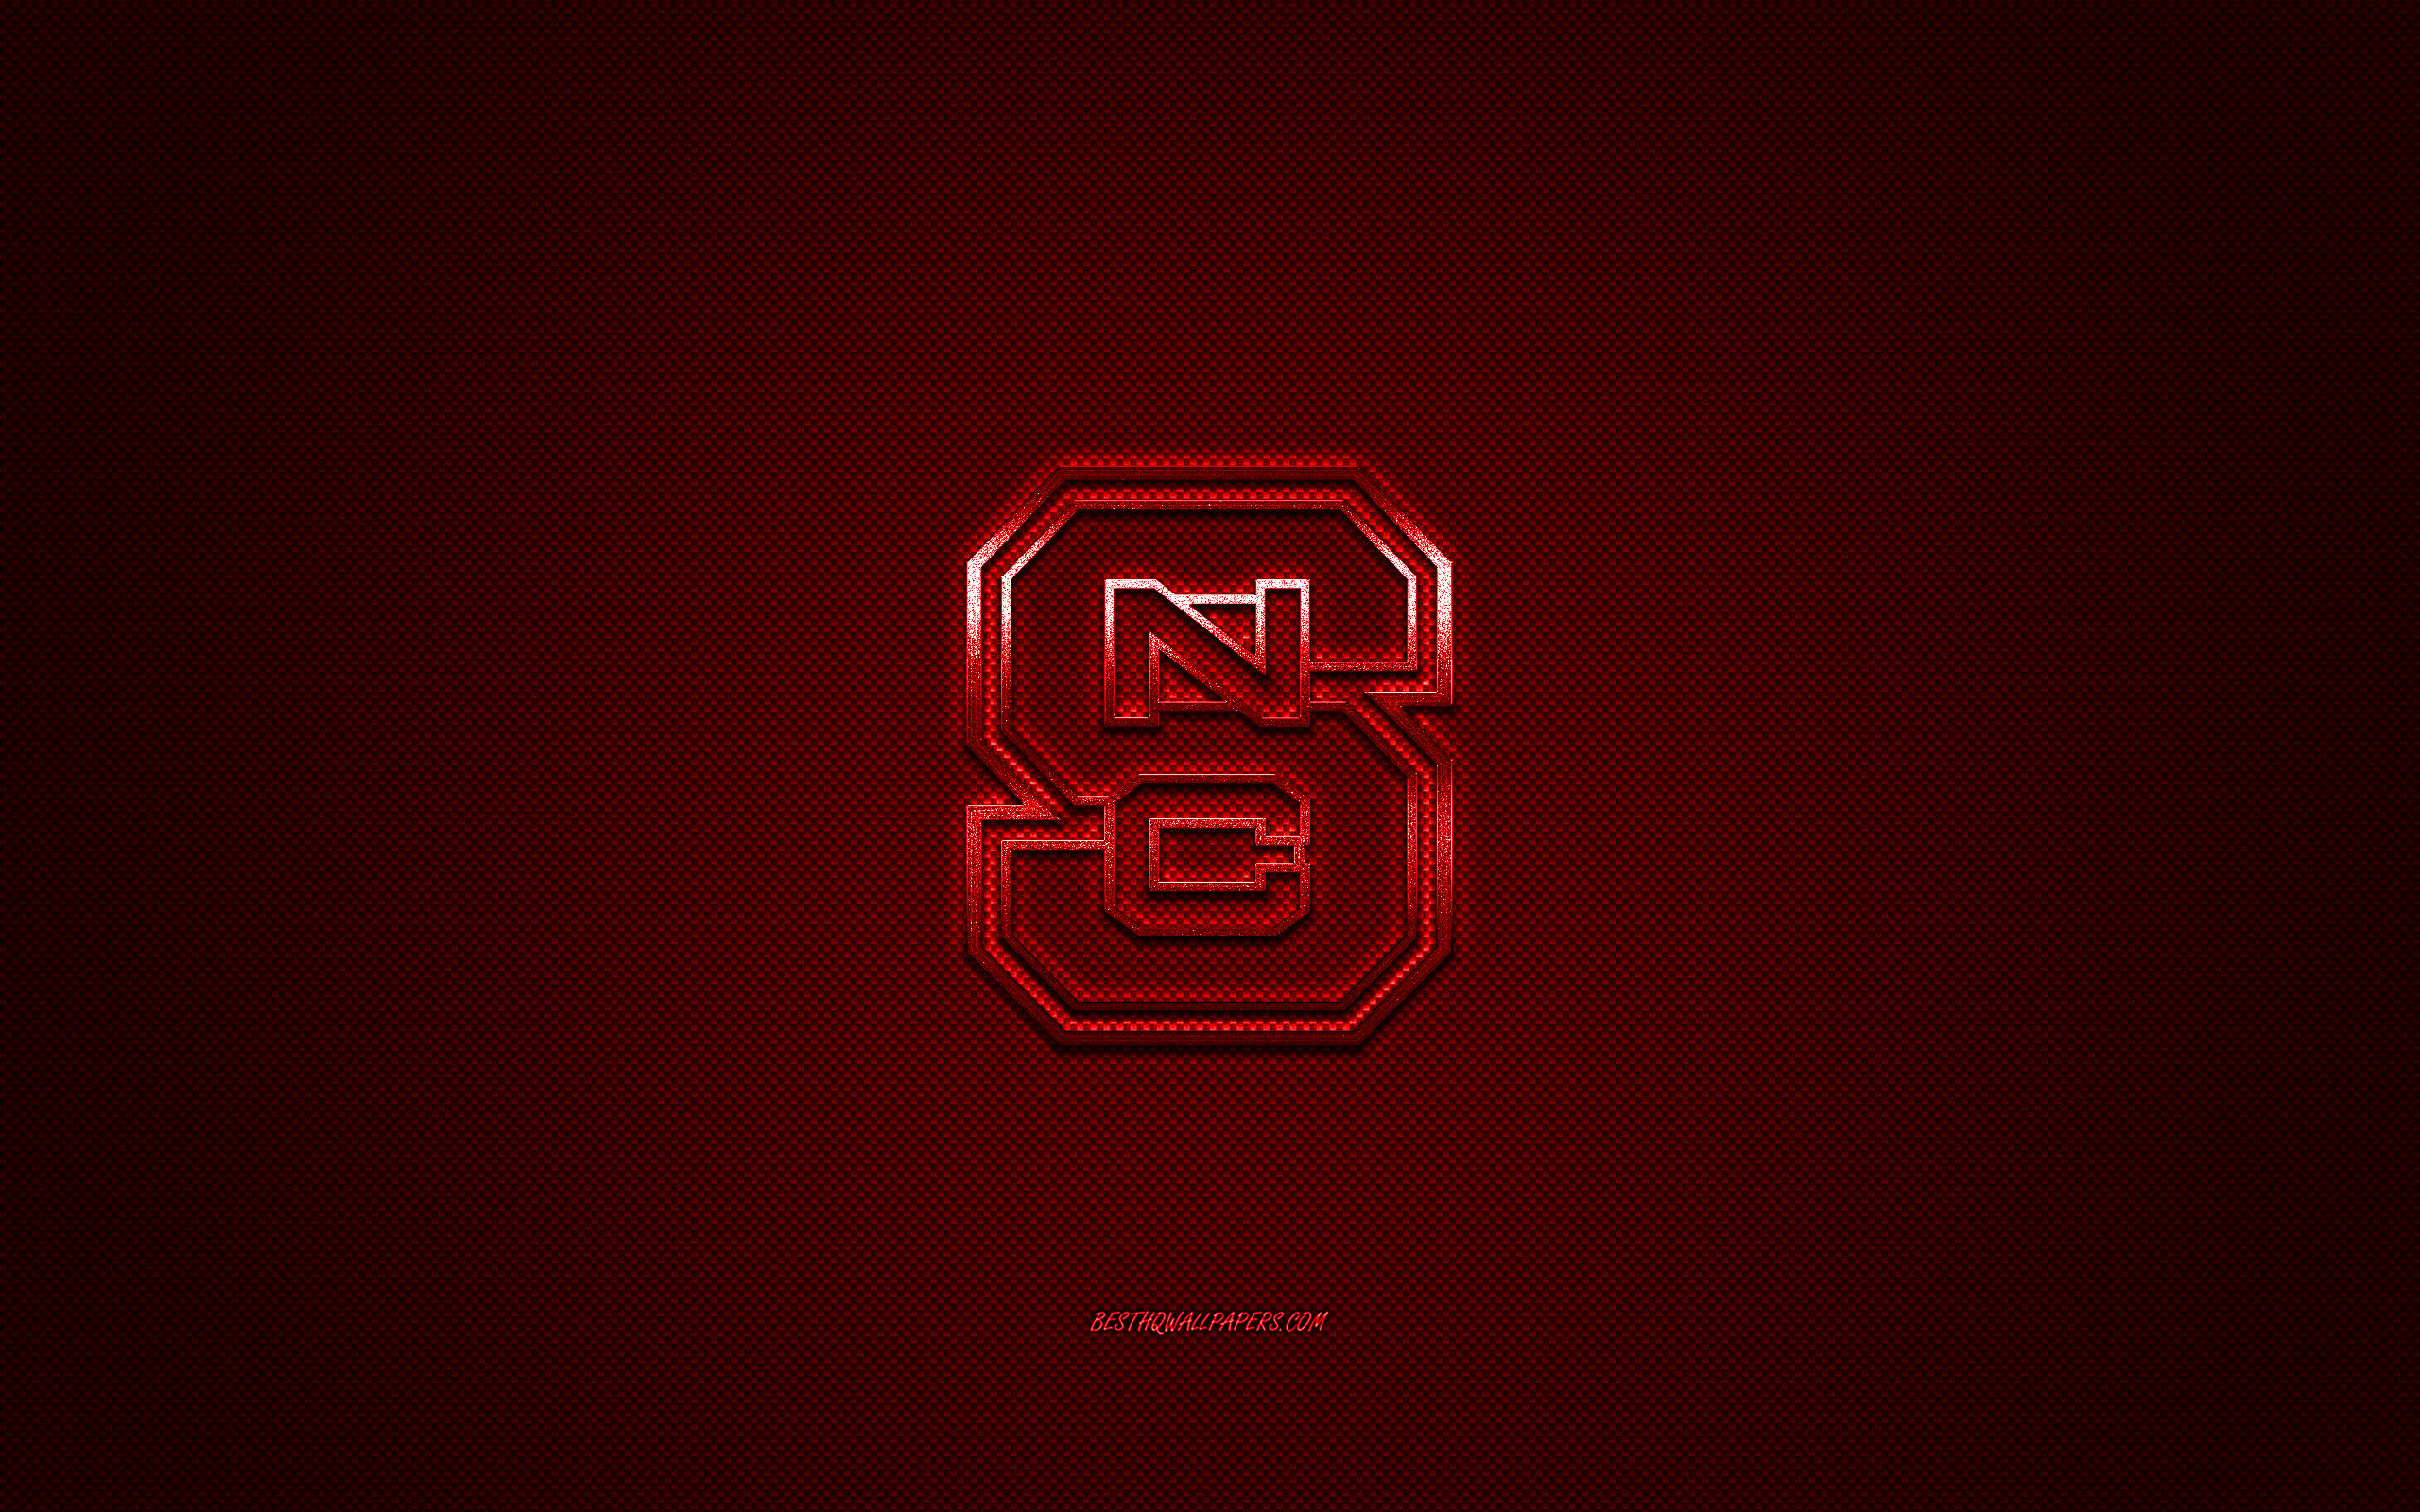 Download wallpaper NC State Wolfpack logo, American football club, NCAA, red logo, red carbon fiber background, American football, Raleigh, North Carolina, USA, NC State Wolfpack for desktop with resolution 2560x1600. High Quality